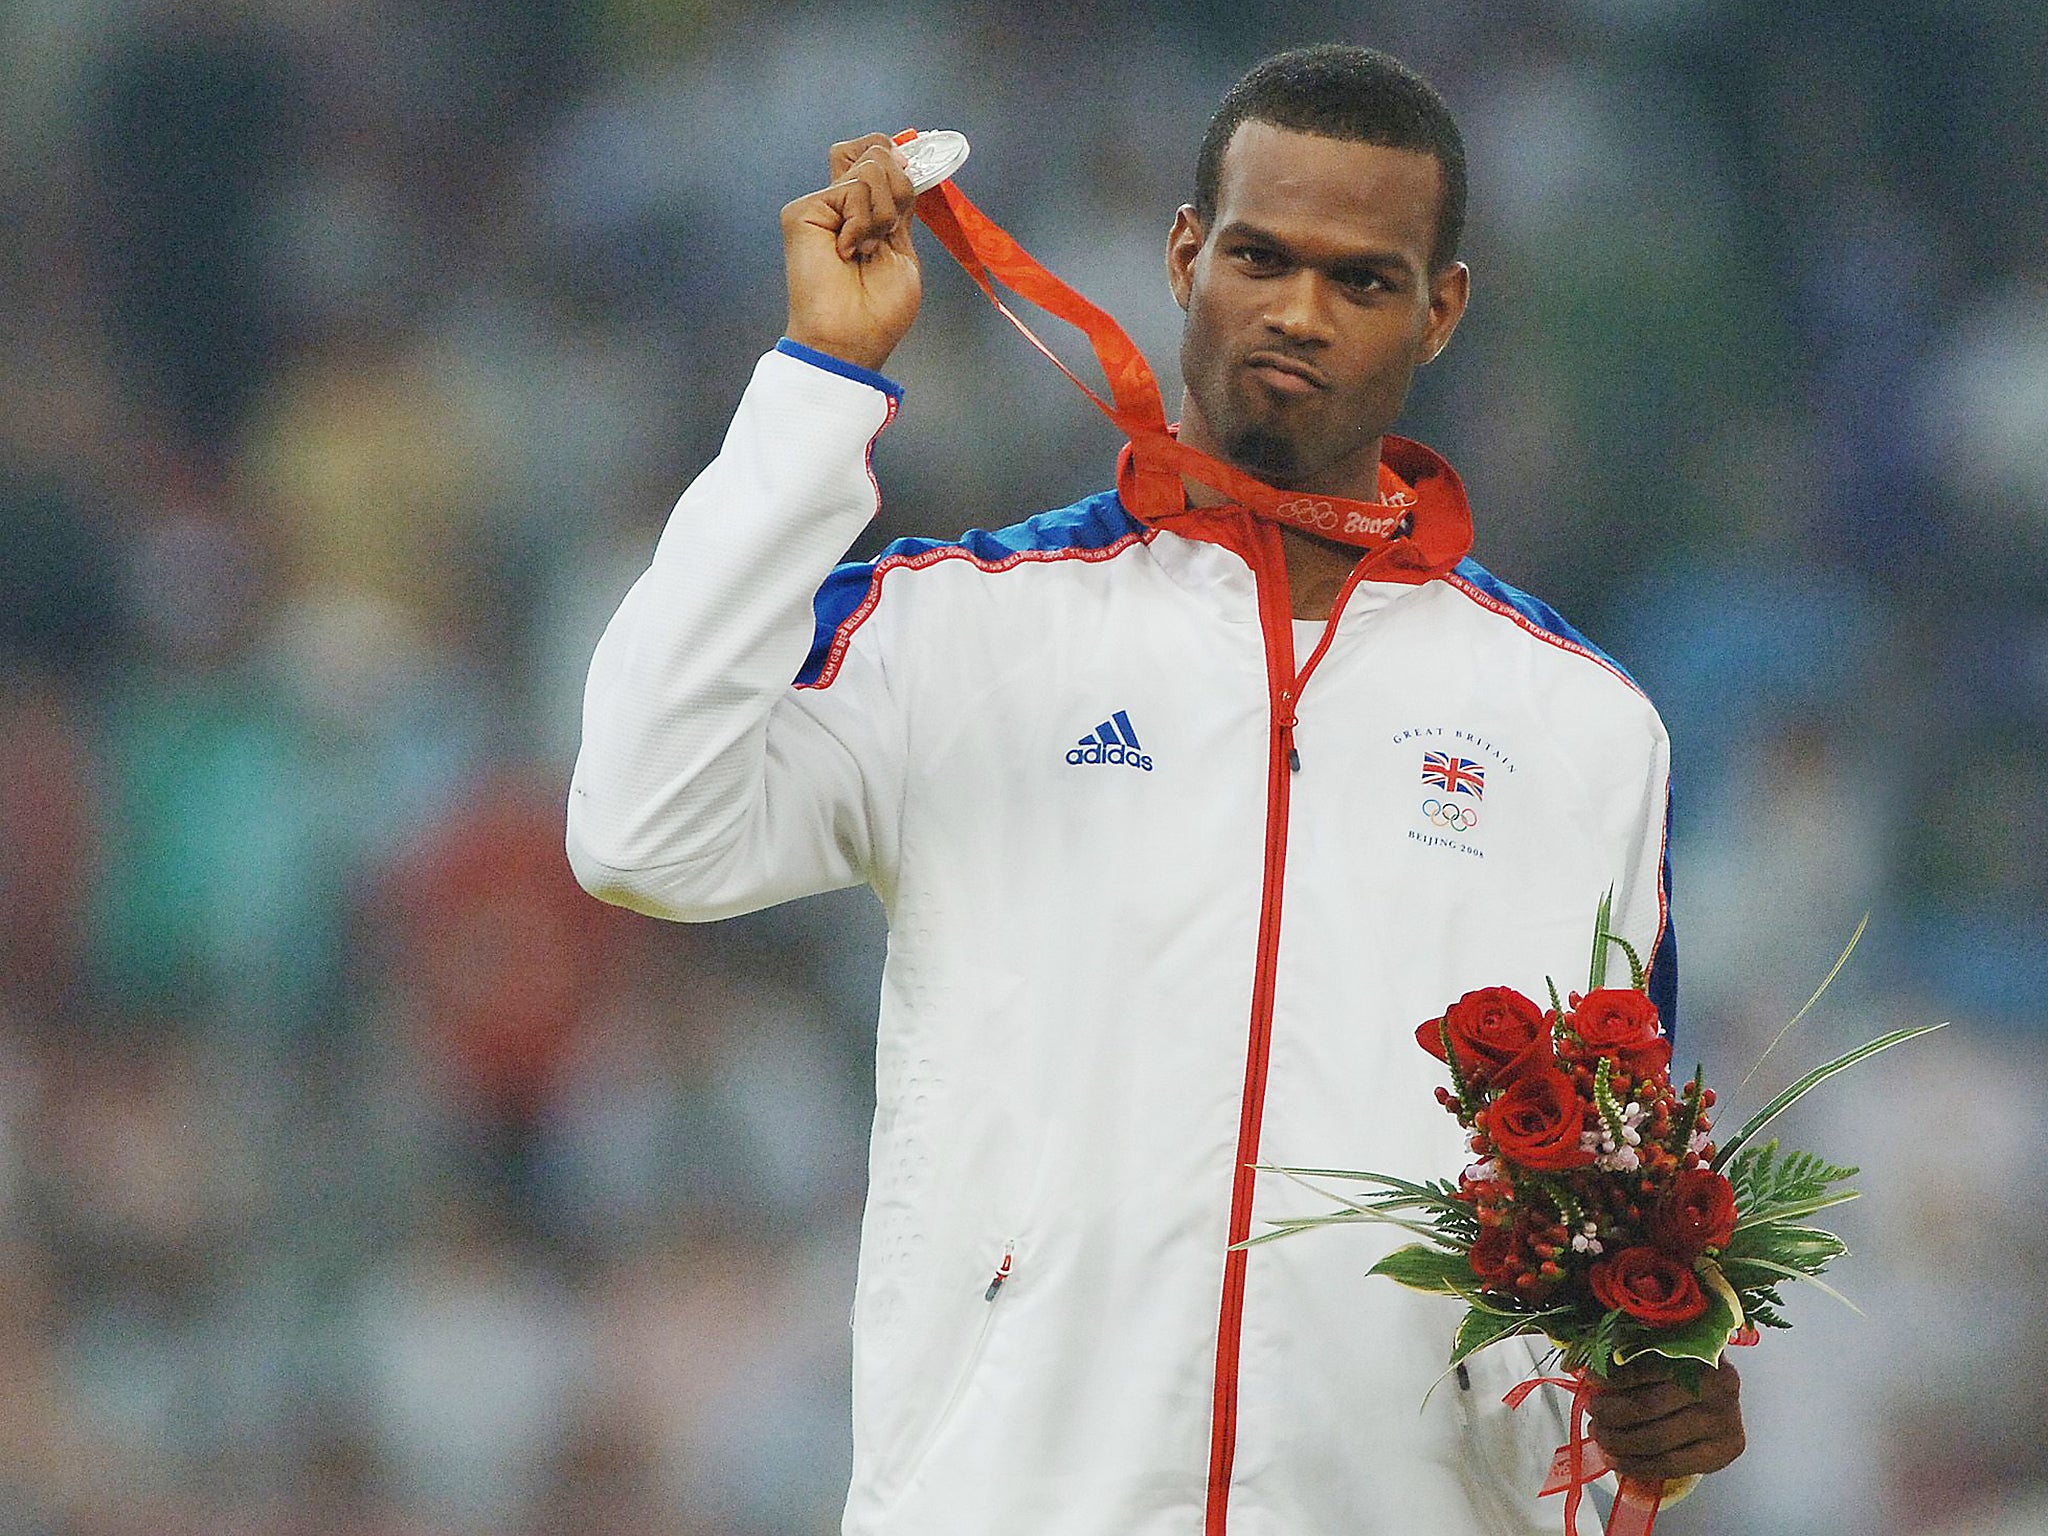 Germaine Mason (GBR) celebrates with his Silver Medal at the Beijing Olympics 2008